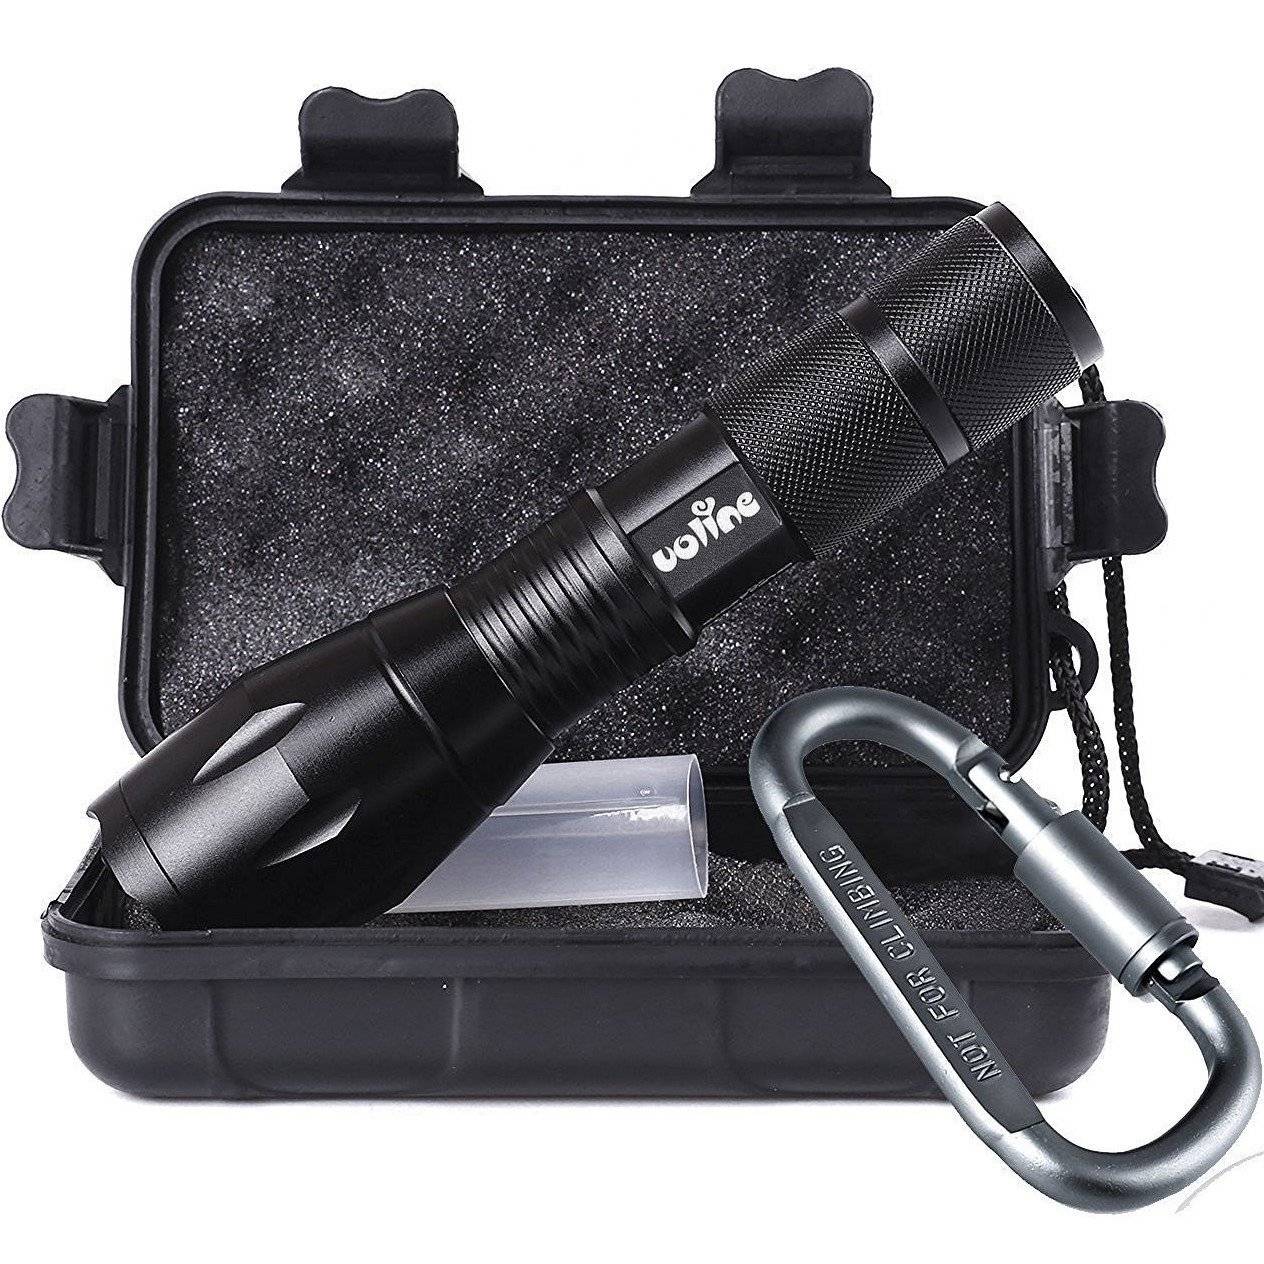 Tactical Portable 1000 Lumens LED Flashlight with 5 Modes